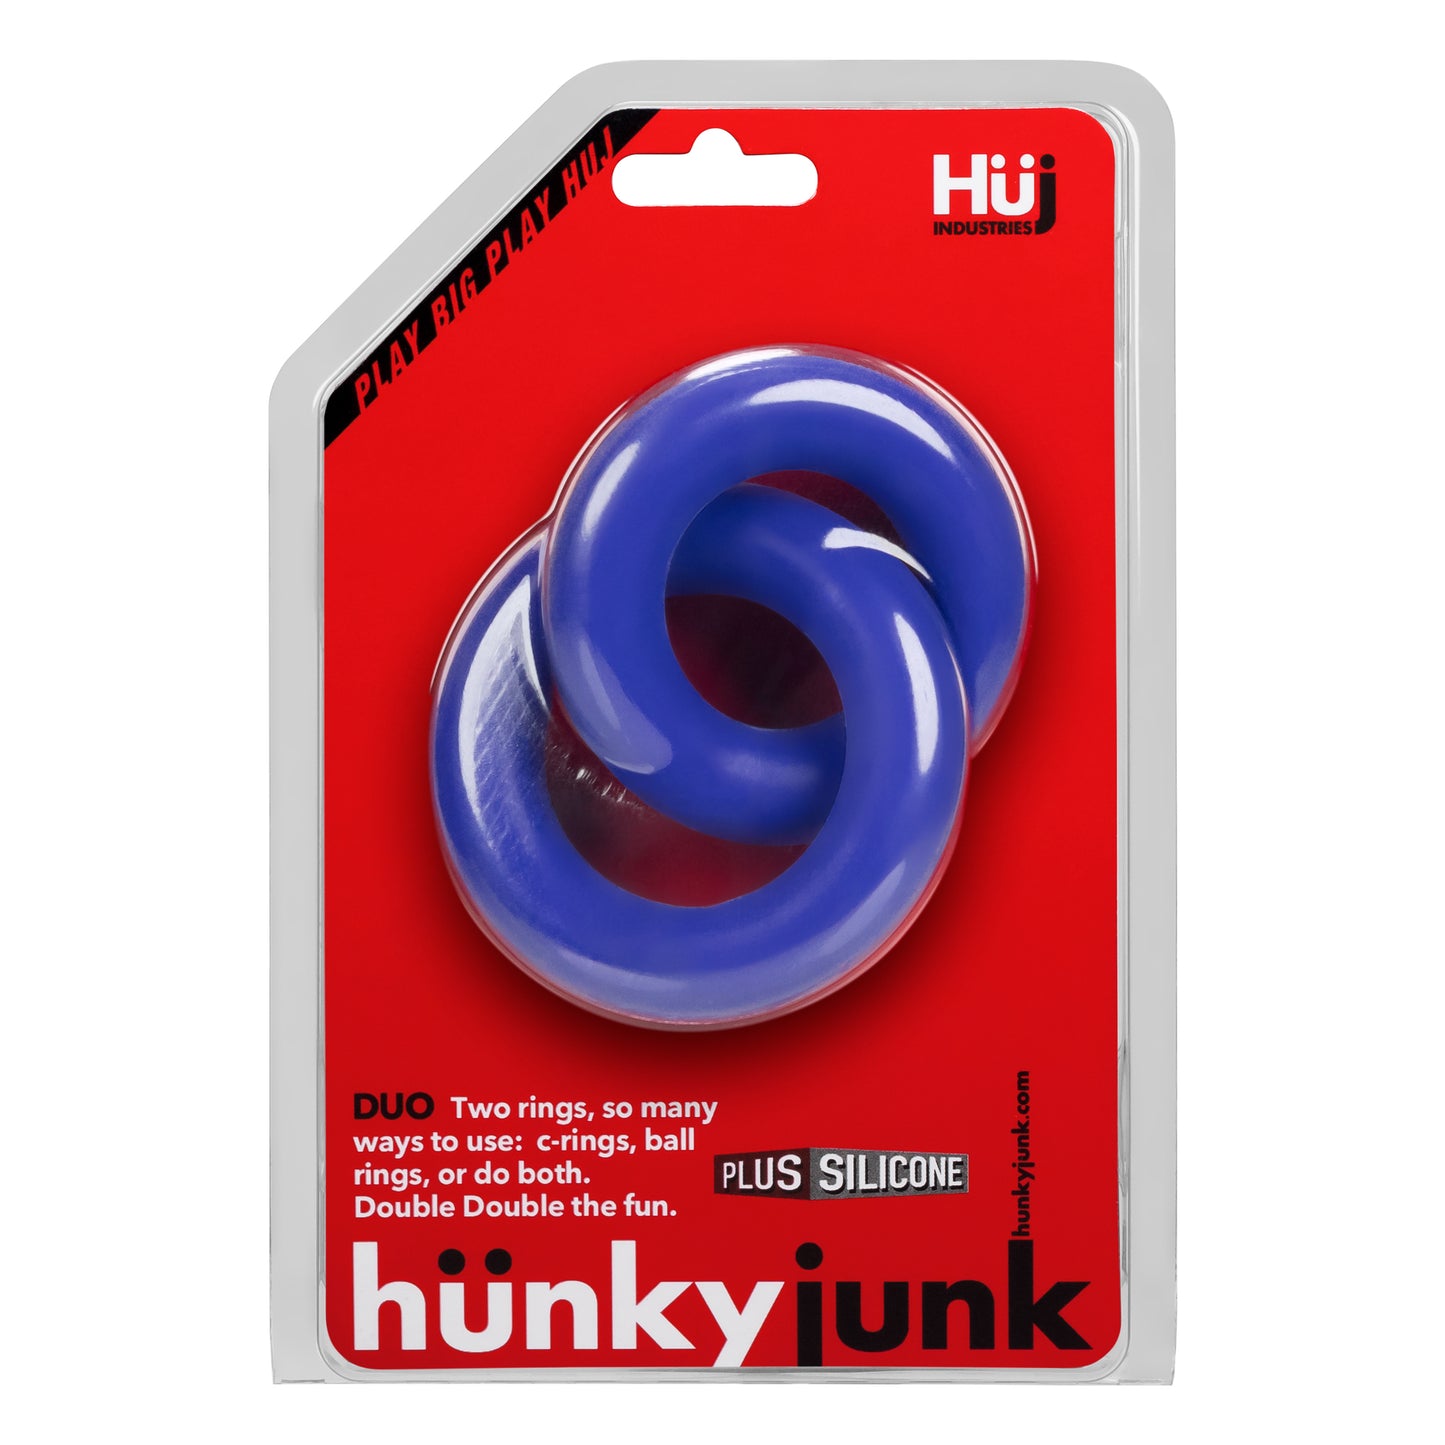 DUO Linked Cock/Ball Rings by Hunkyjunk Cobalt - Just for you desires